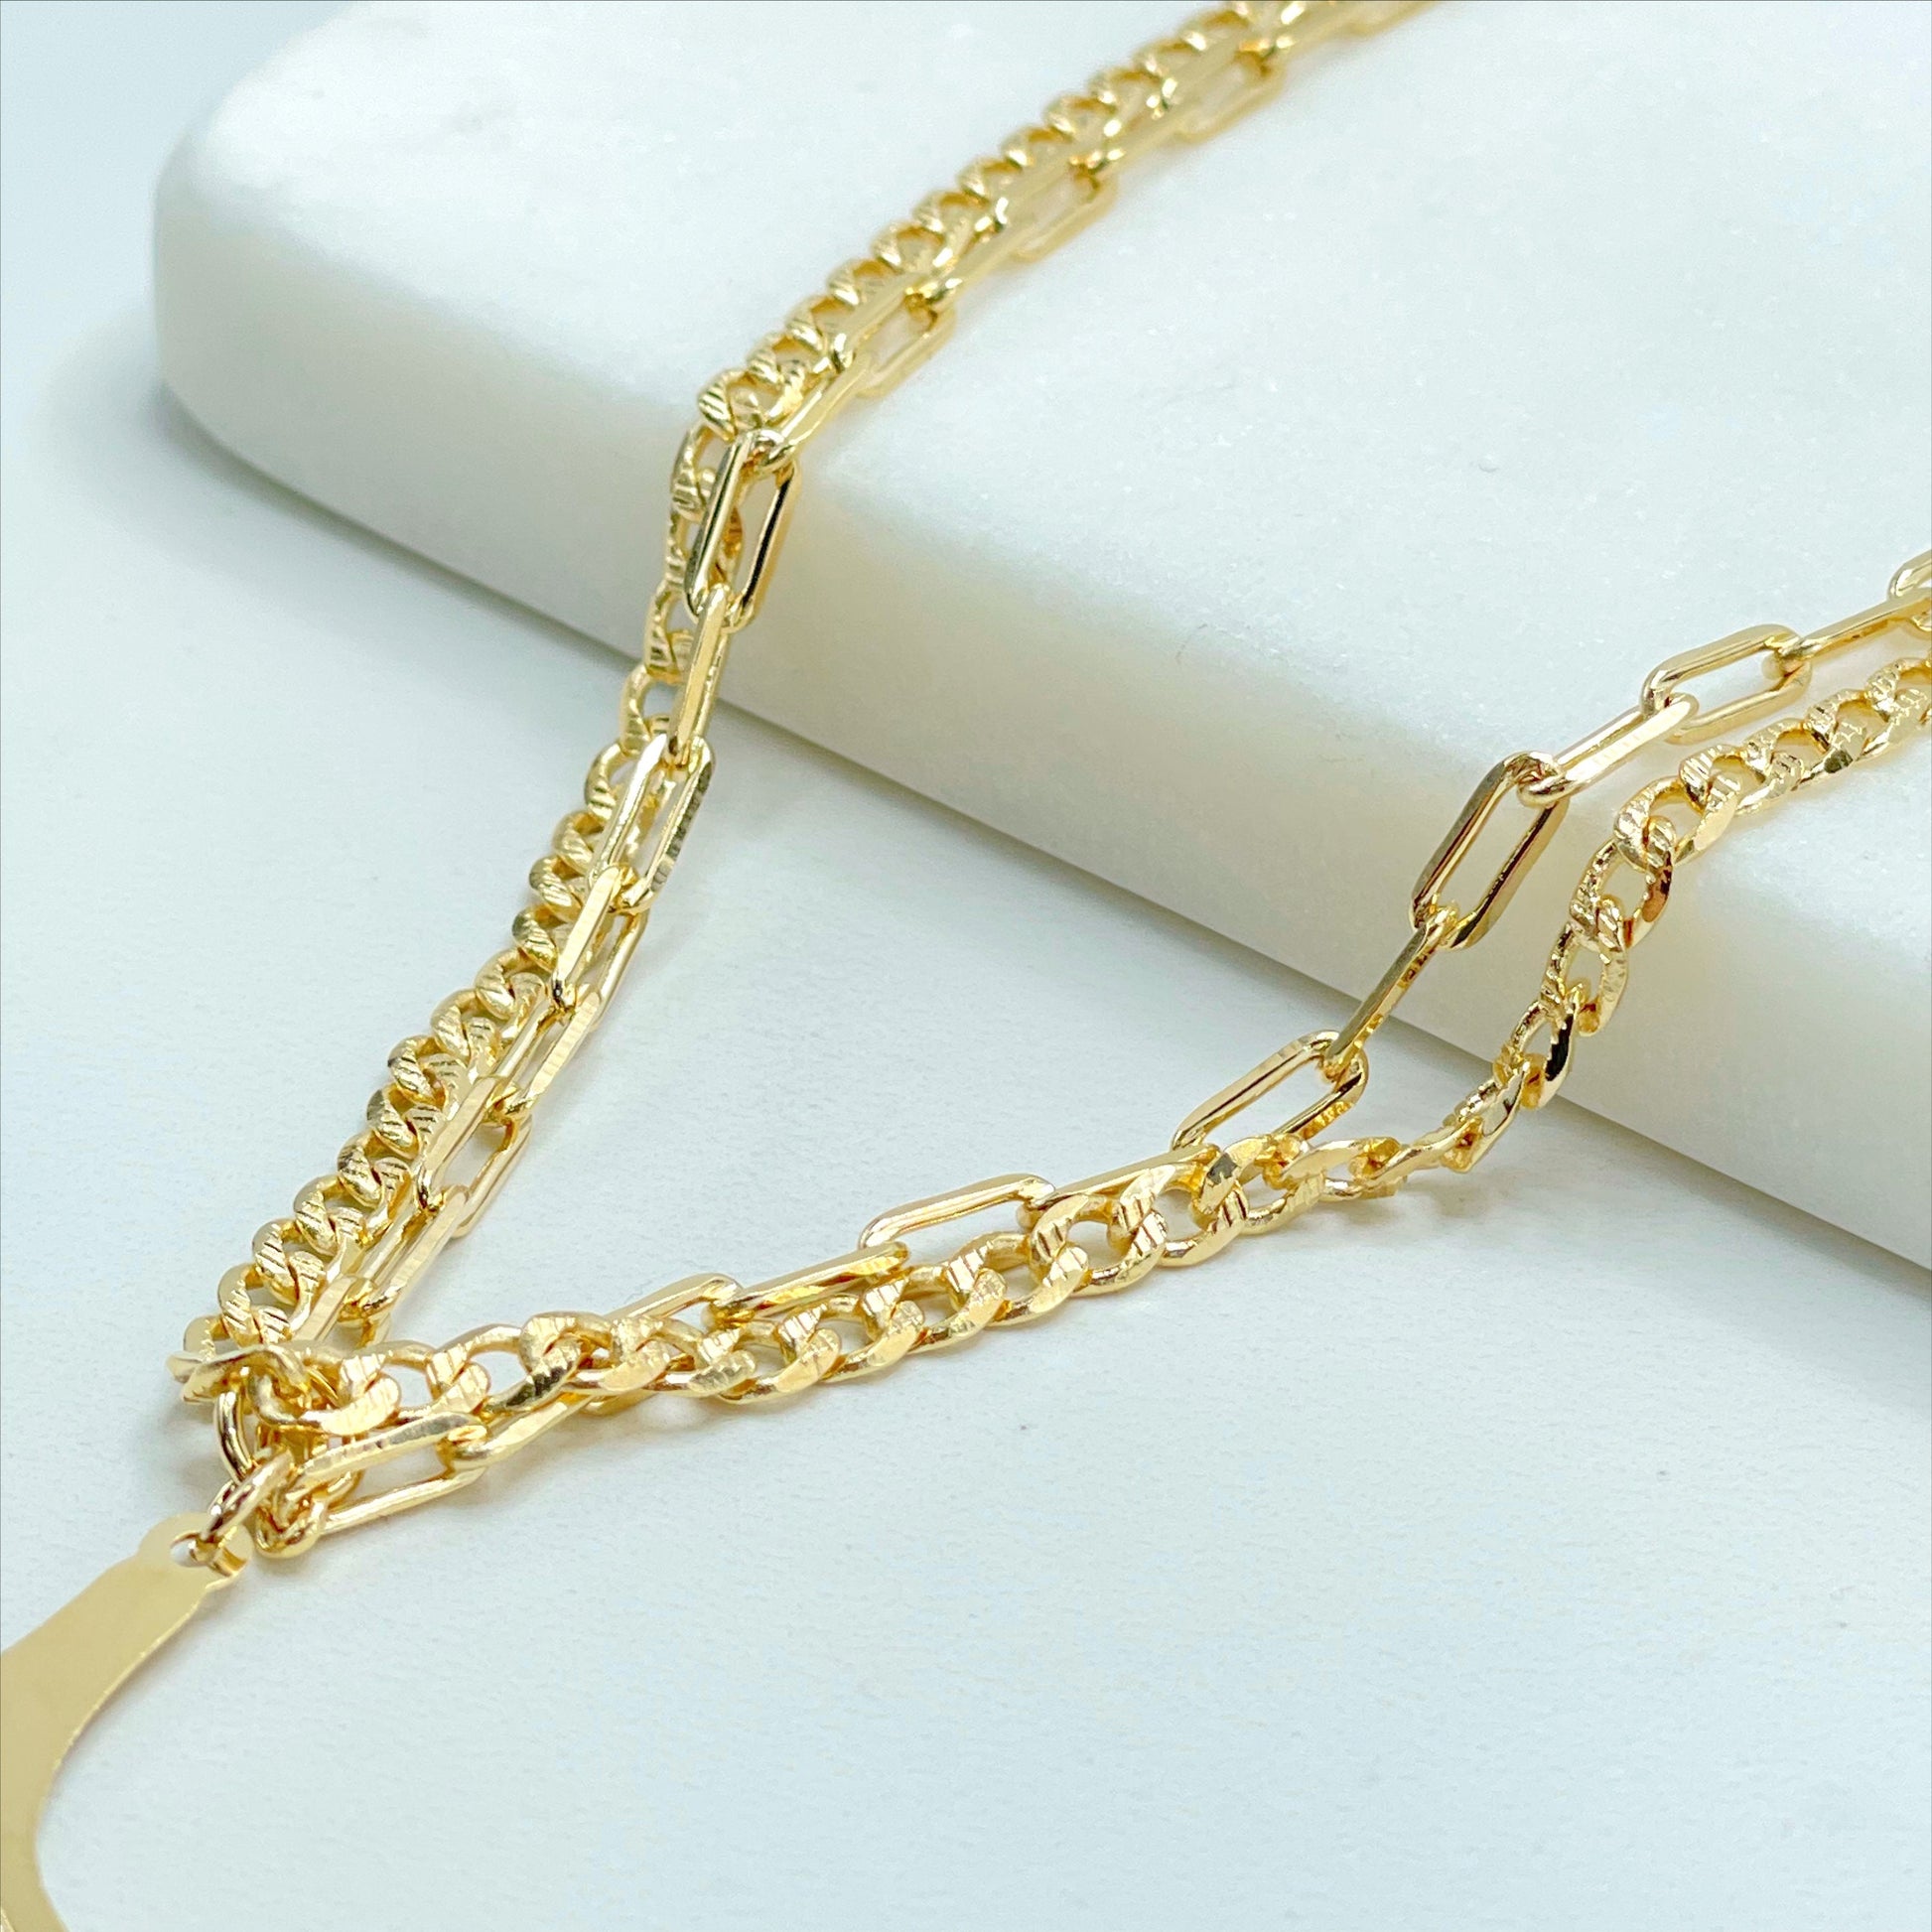 18k Gold Filled Bundle 3mm PaperClip Chain & 3mm Curb Link Chain, Mermaid Whale Tail Charm Anklet, Wholesales Jewelry Making Supplies